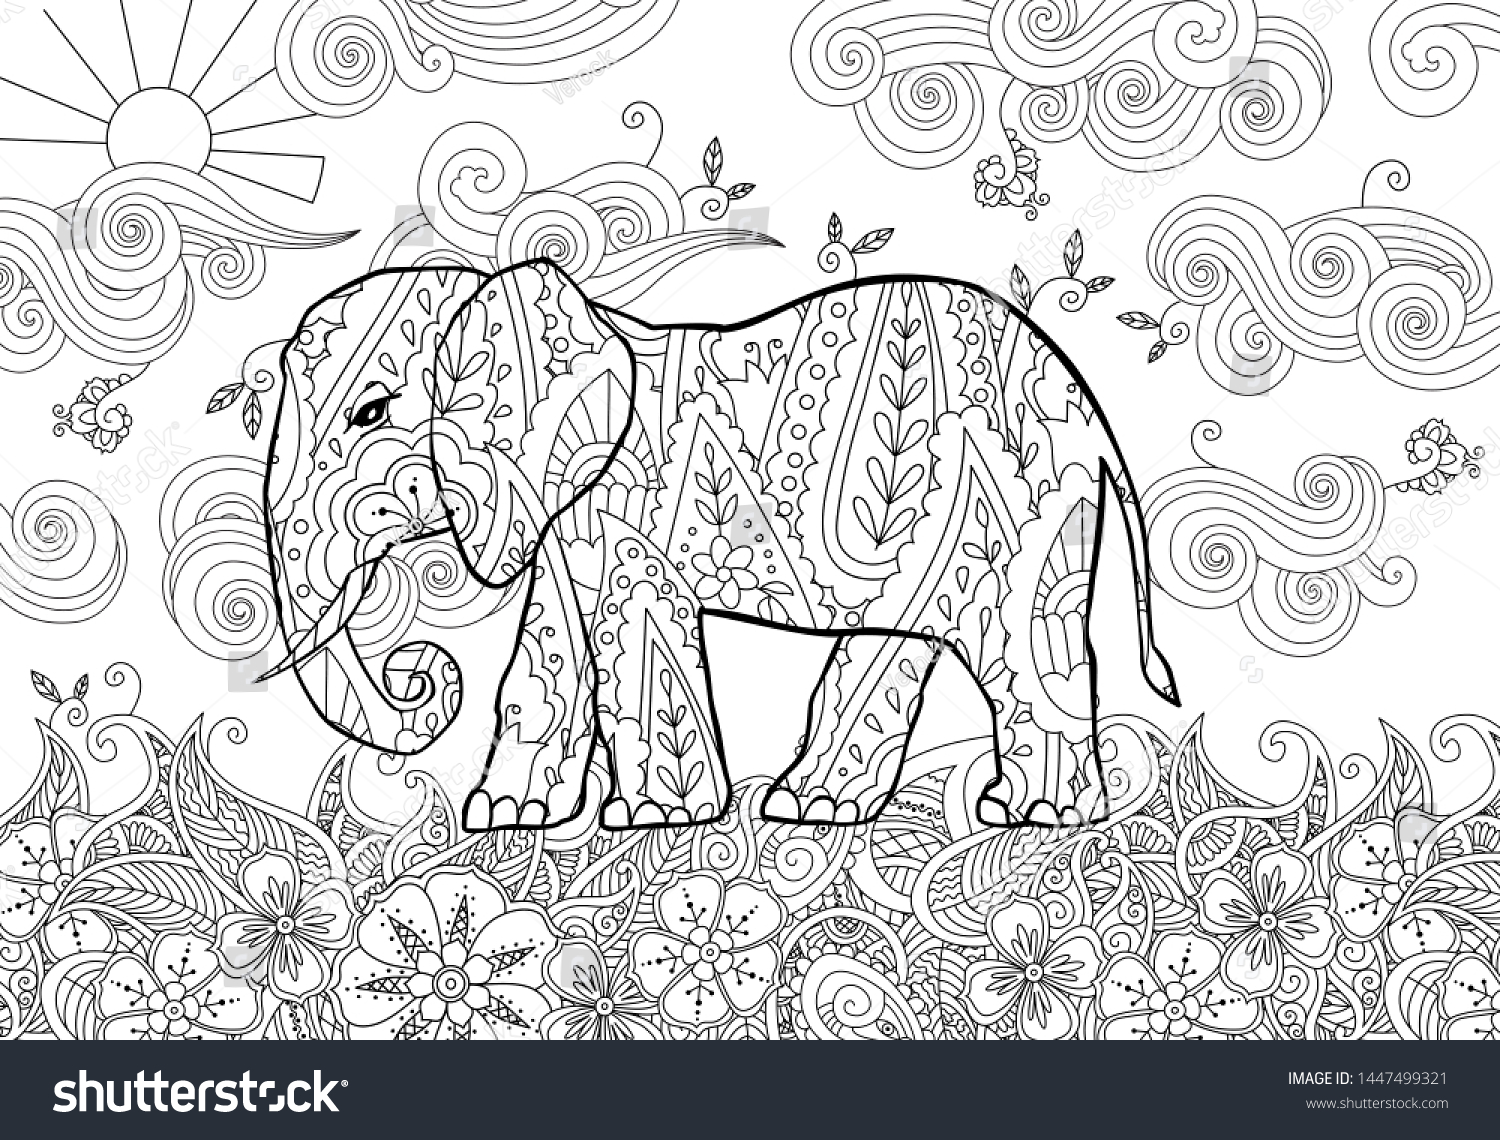 Coloring Page Doodle Style Elephant On Stock Vector (Royalty Free ...